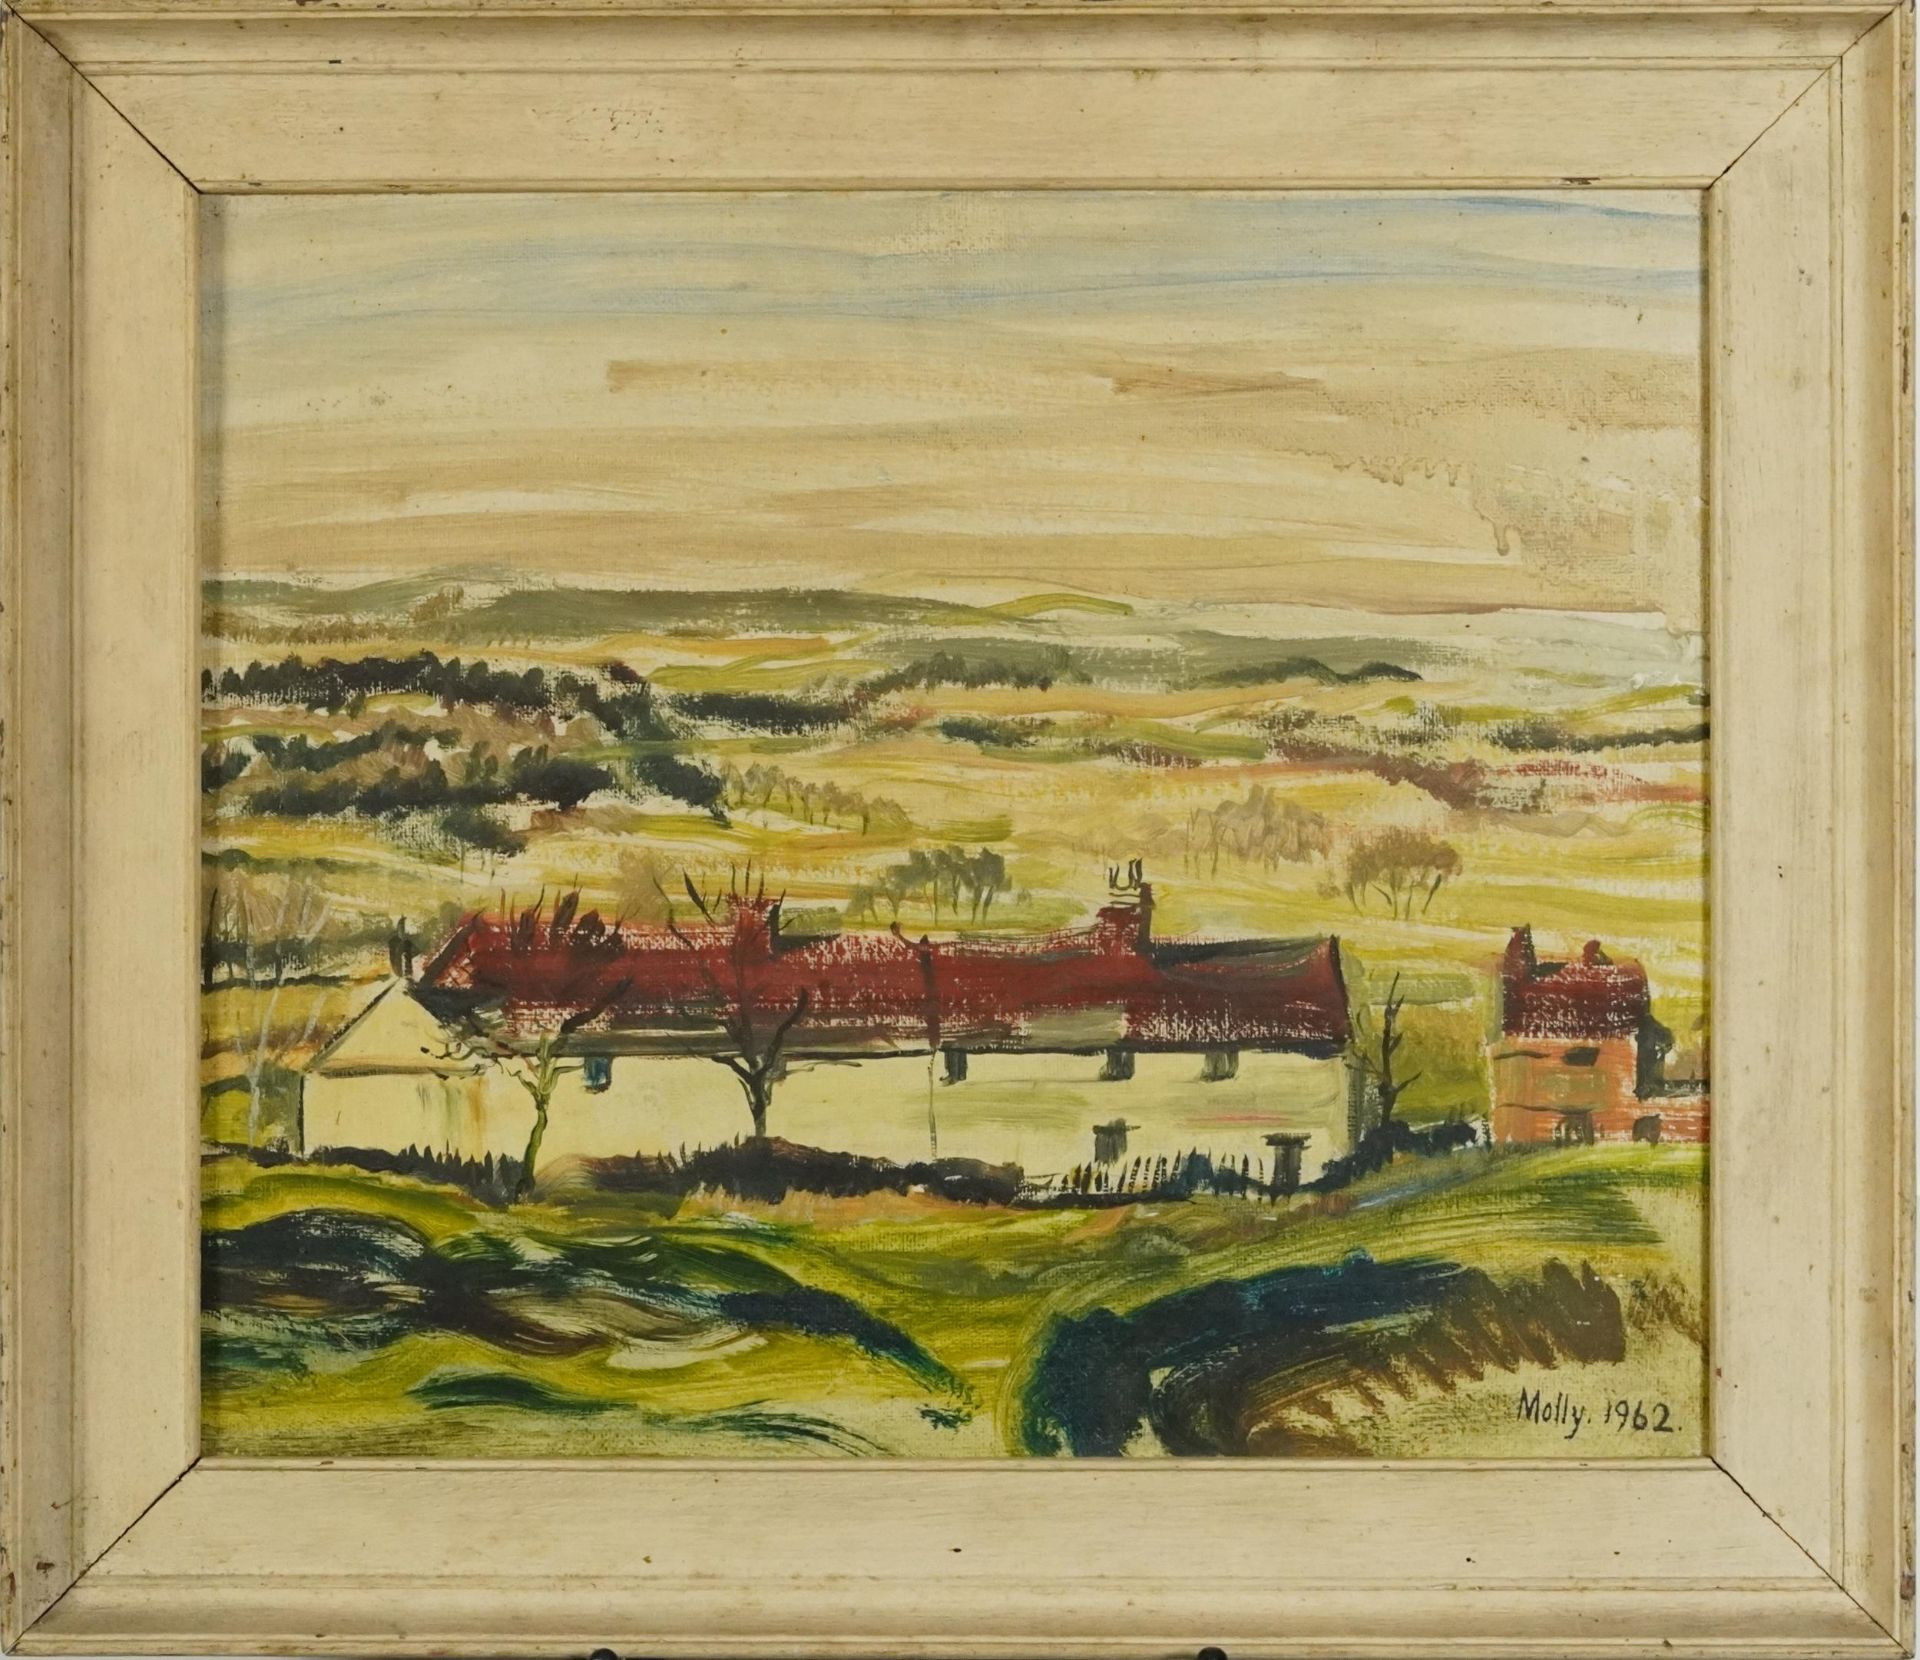 Molly 1962 - Landscape with cottages, Modern British oil on canvas board, mounted and framed, 40cm x - Image 2 of 4